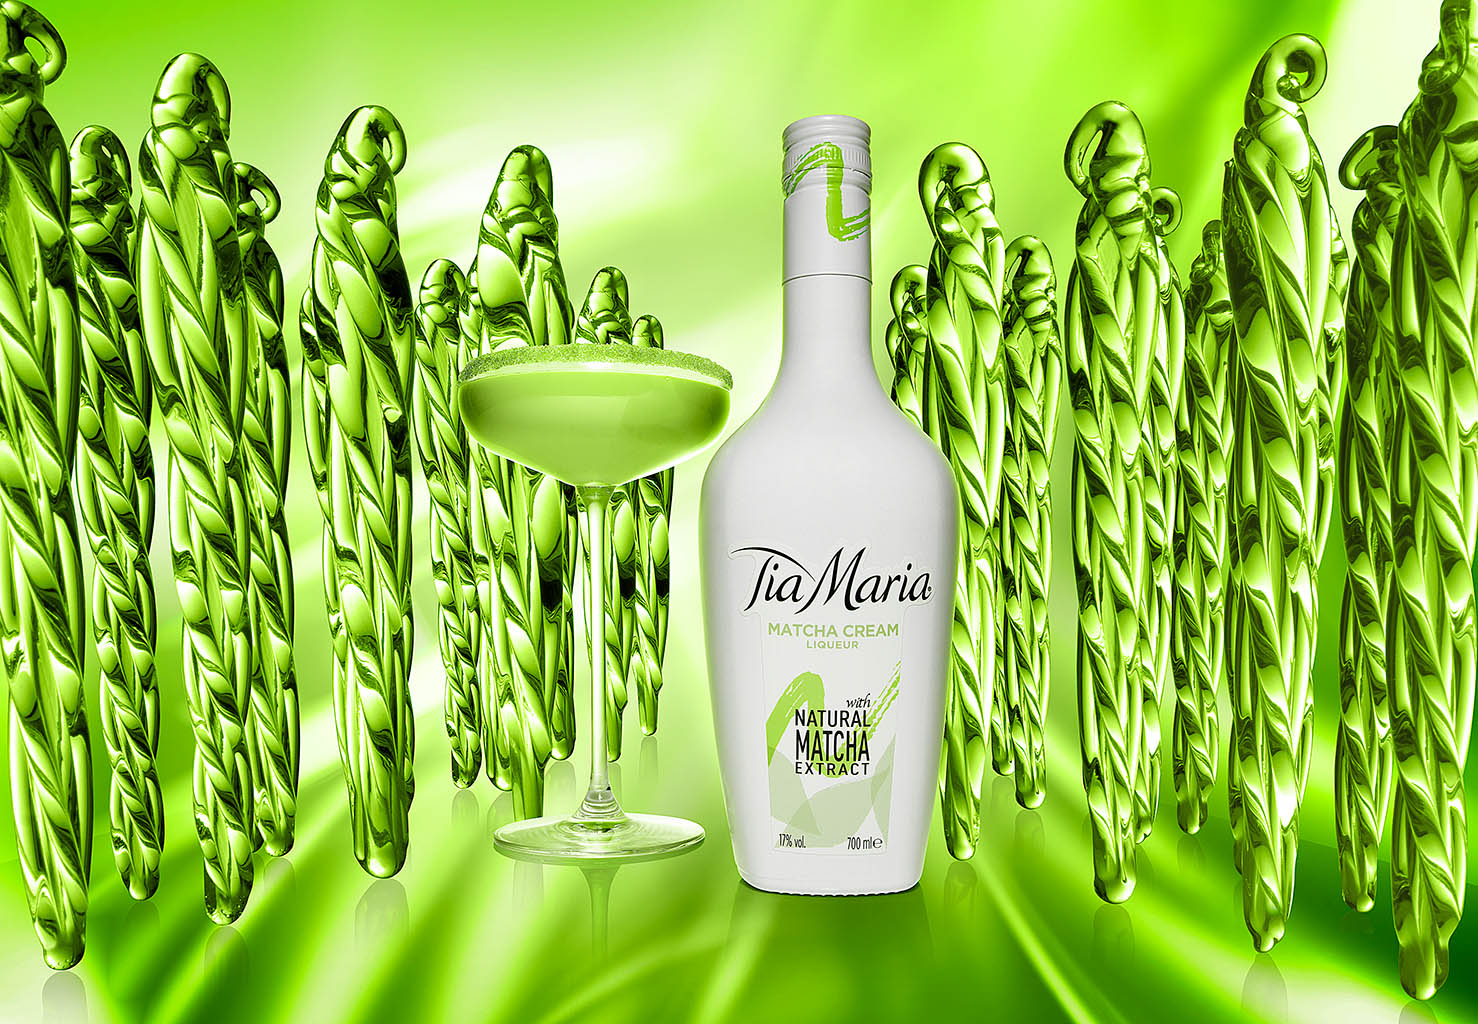 Packshot Factory - Serve - Tia Maria Matcha bottle and serve with icicles